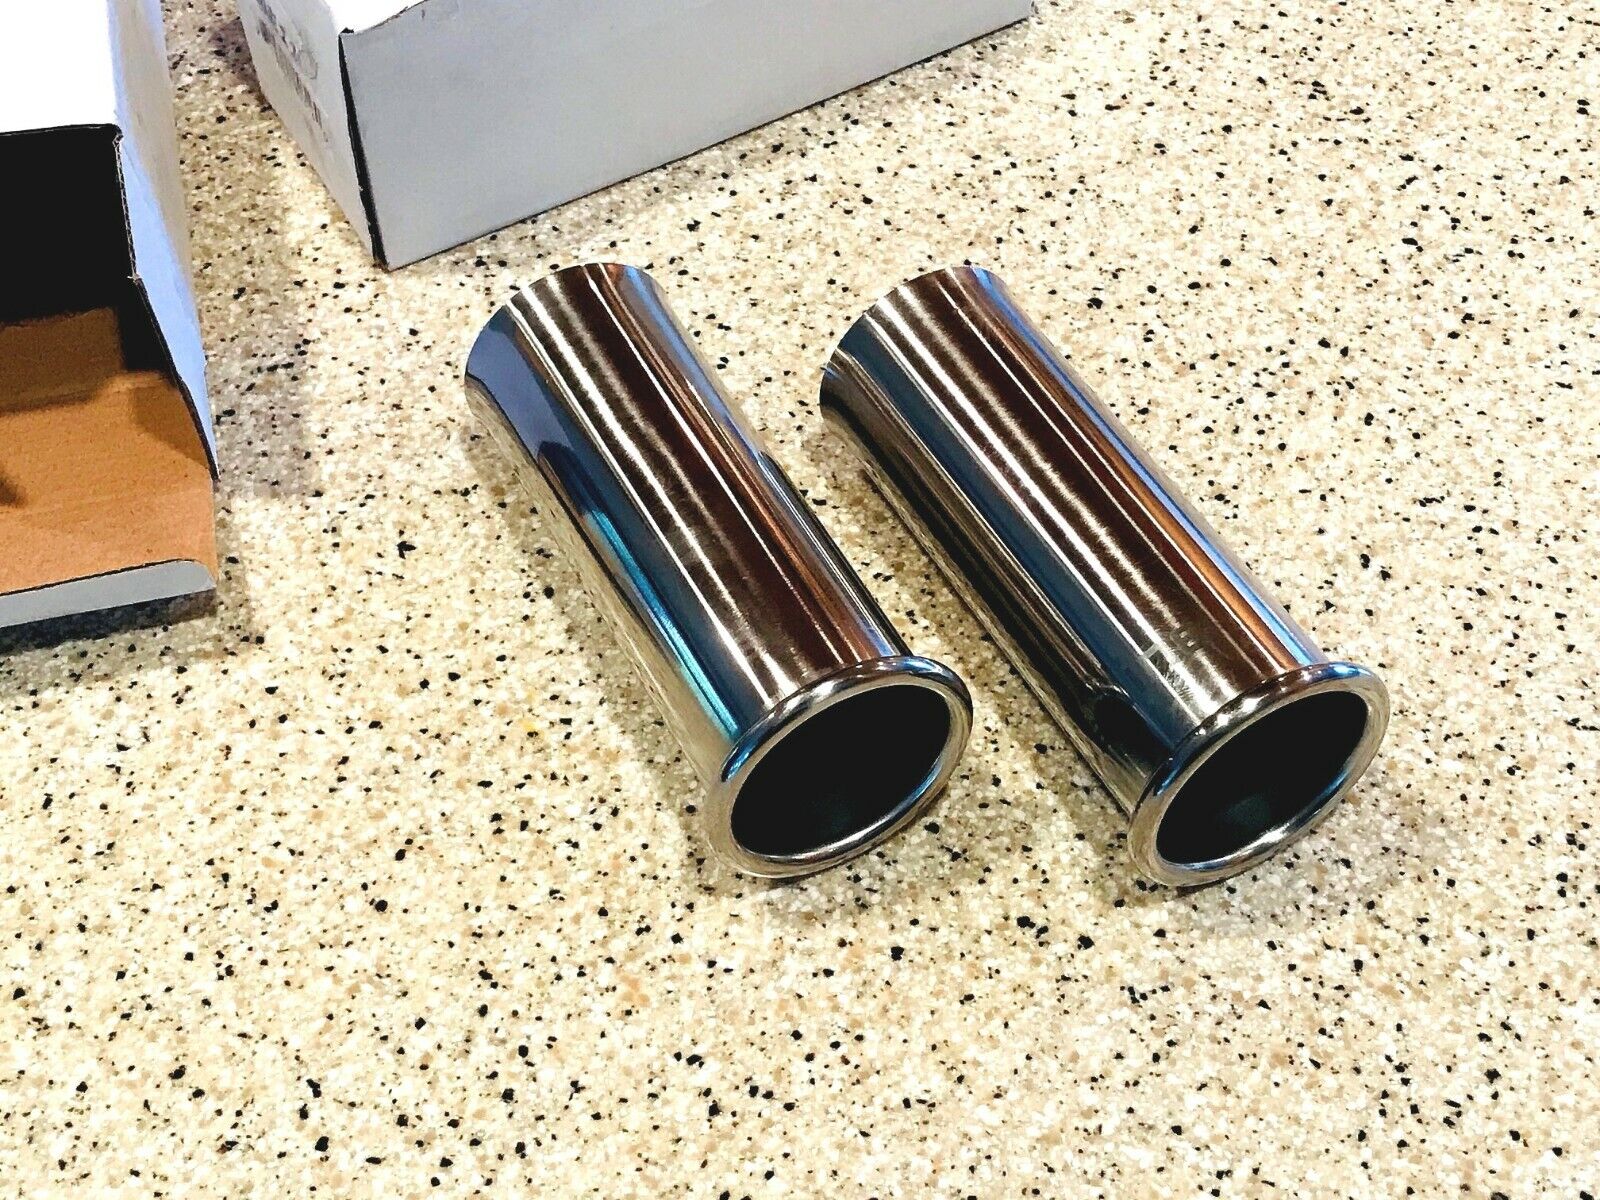 MERCEDES BENZ 230SL 250SL 280SL EXHAUST TIP STAINLESS STEEL POLISHED PAIR